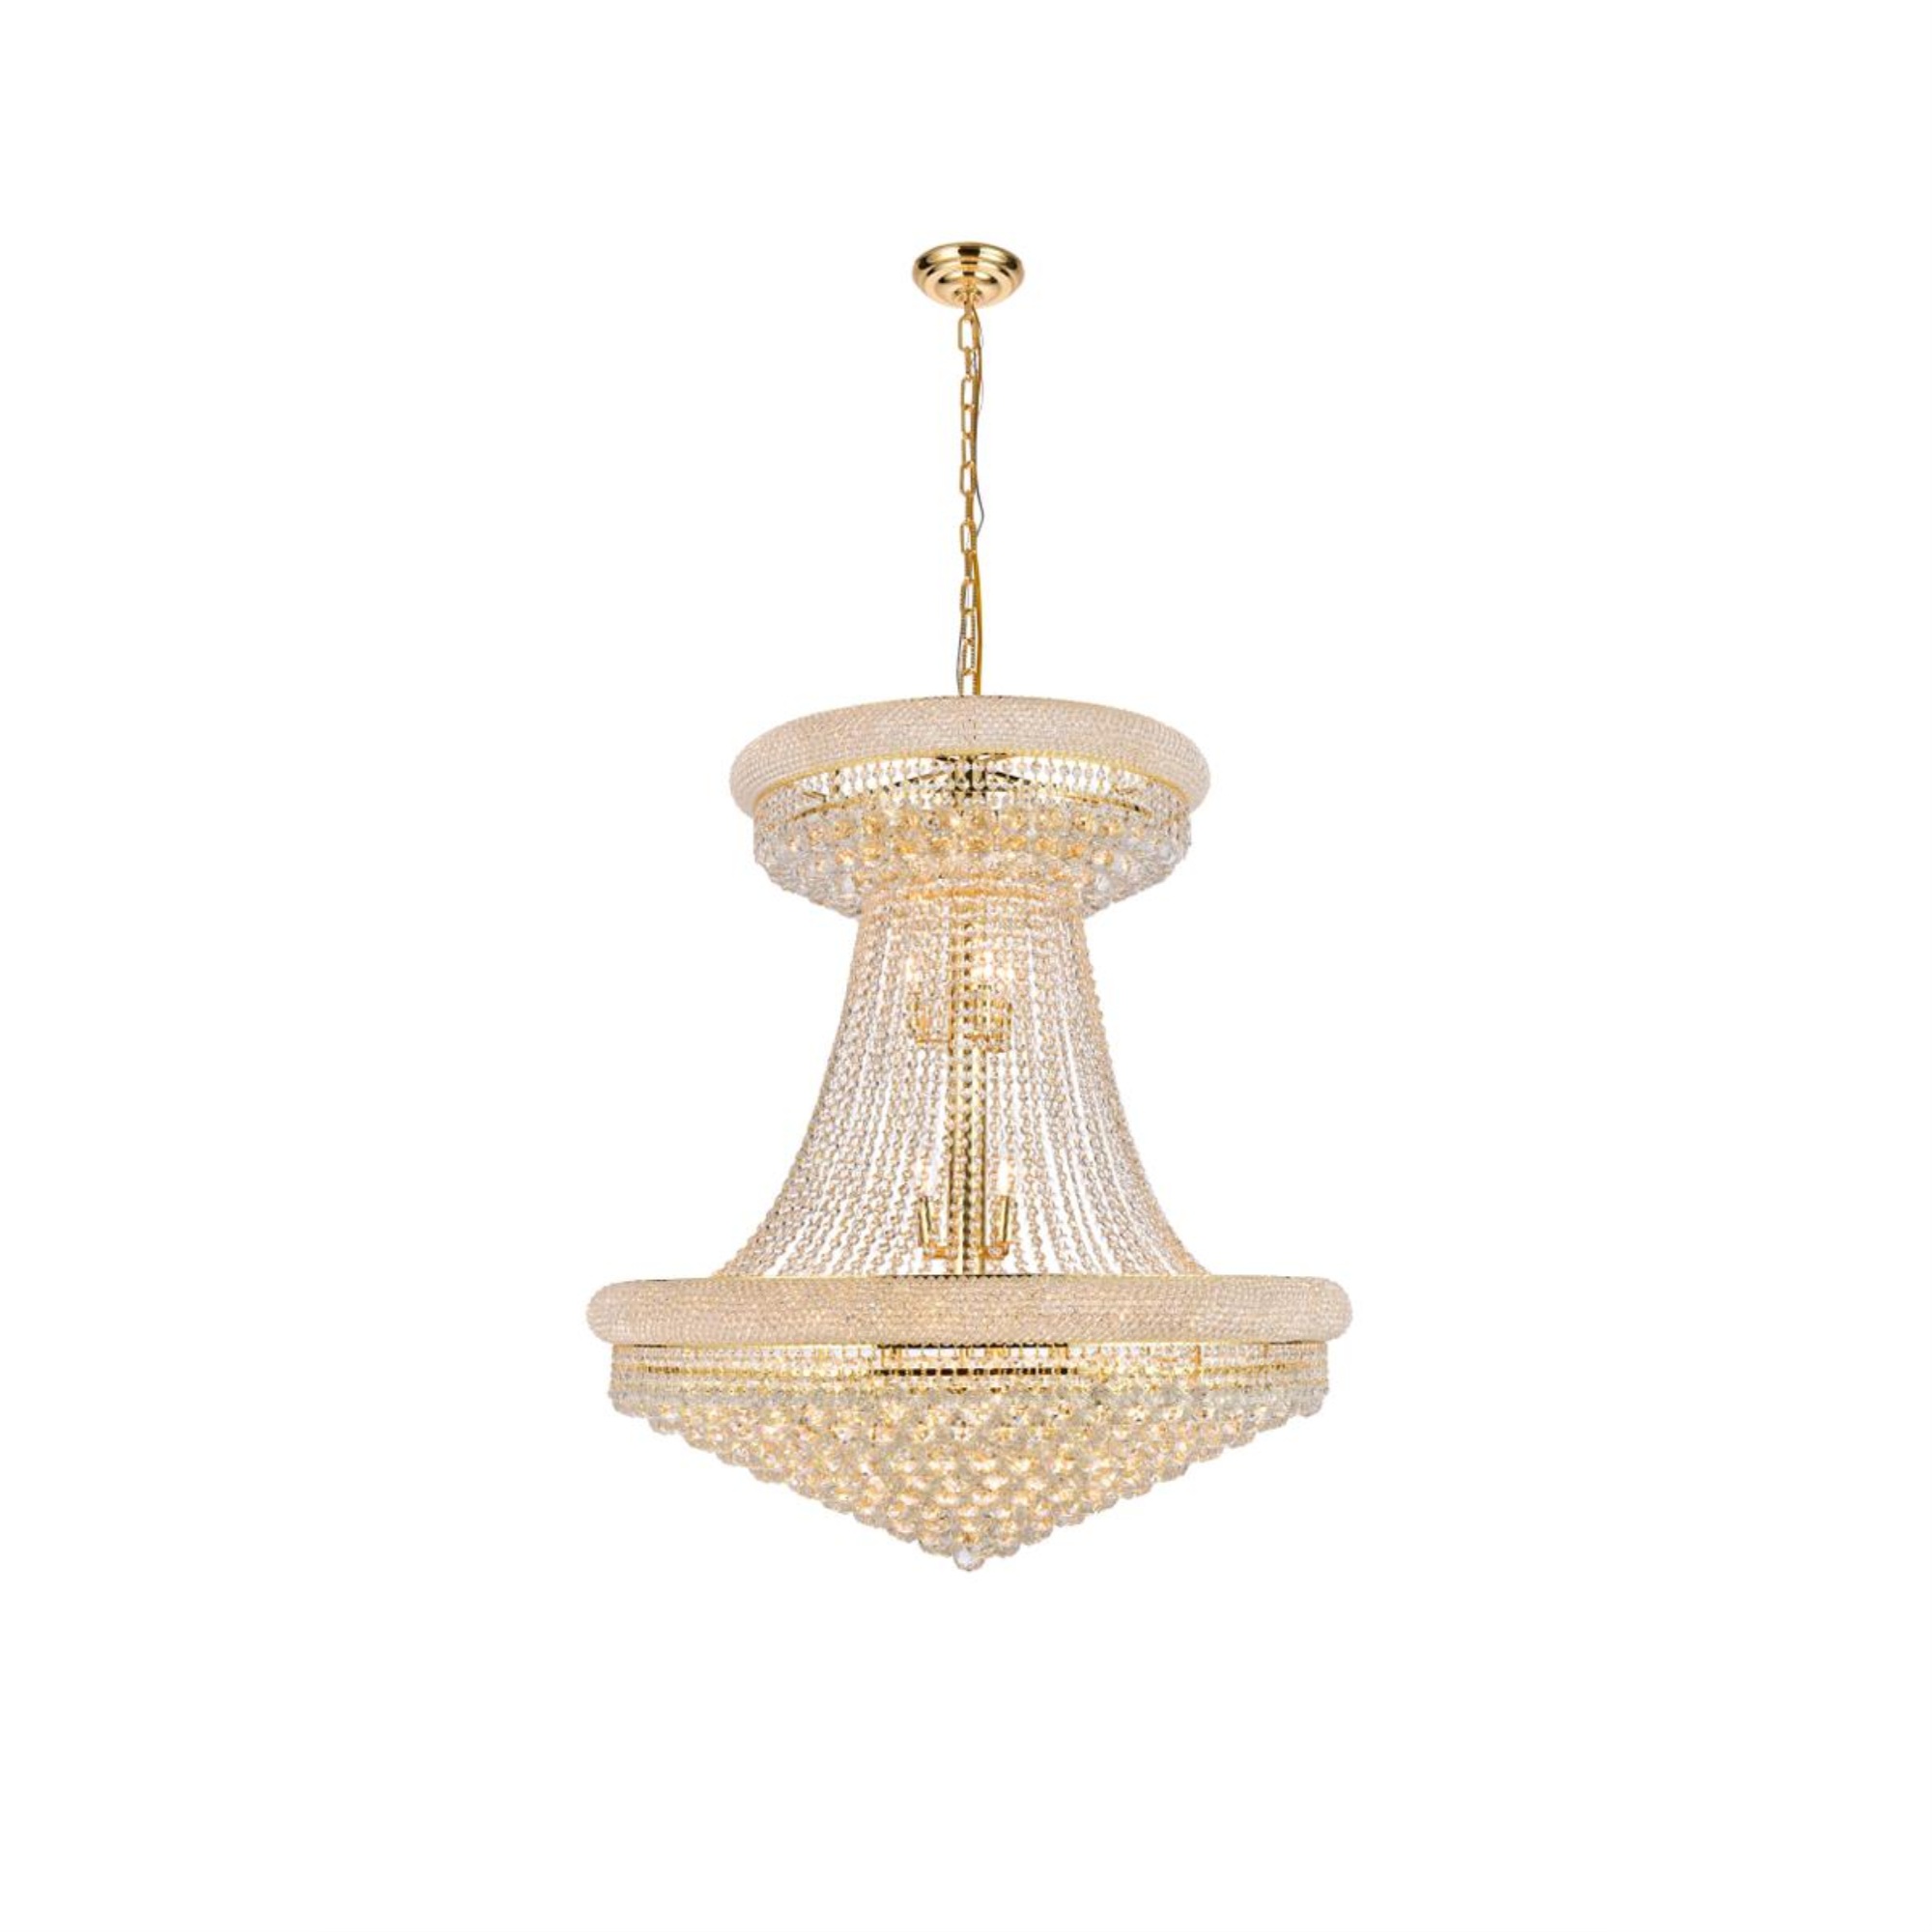 Elegant Lighting 1800 Primo Collection Large Hanging Fixture D36in H45in Lt:28 Gold Finish (Royal Cut Crystals)